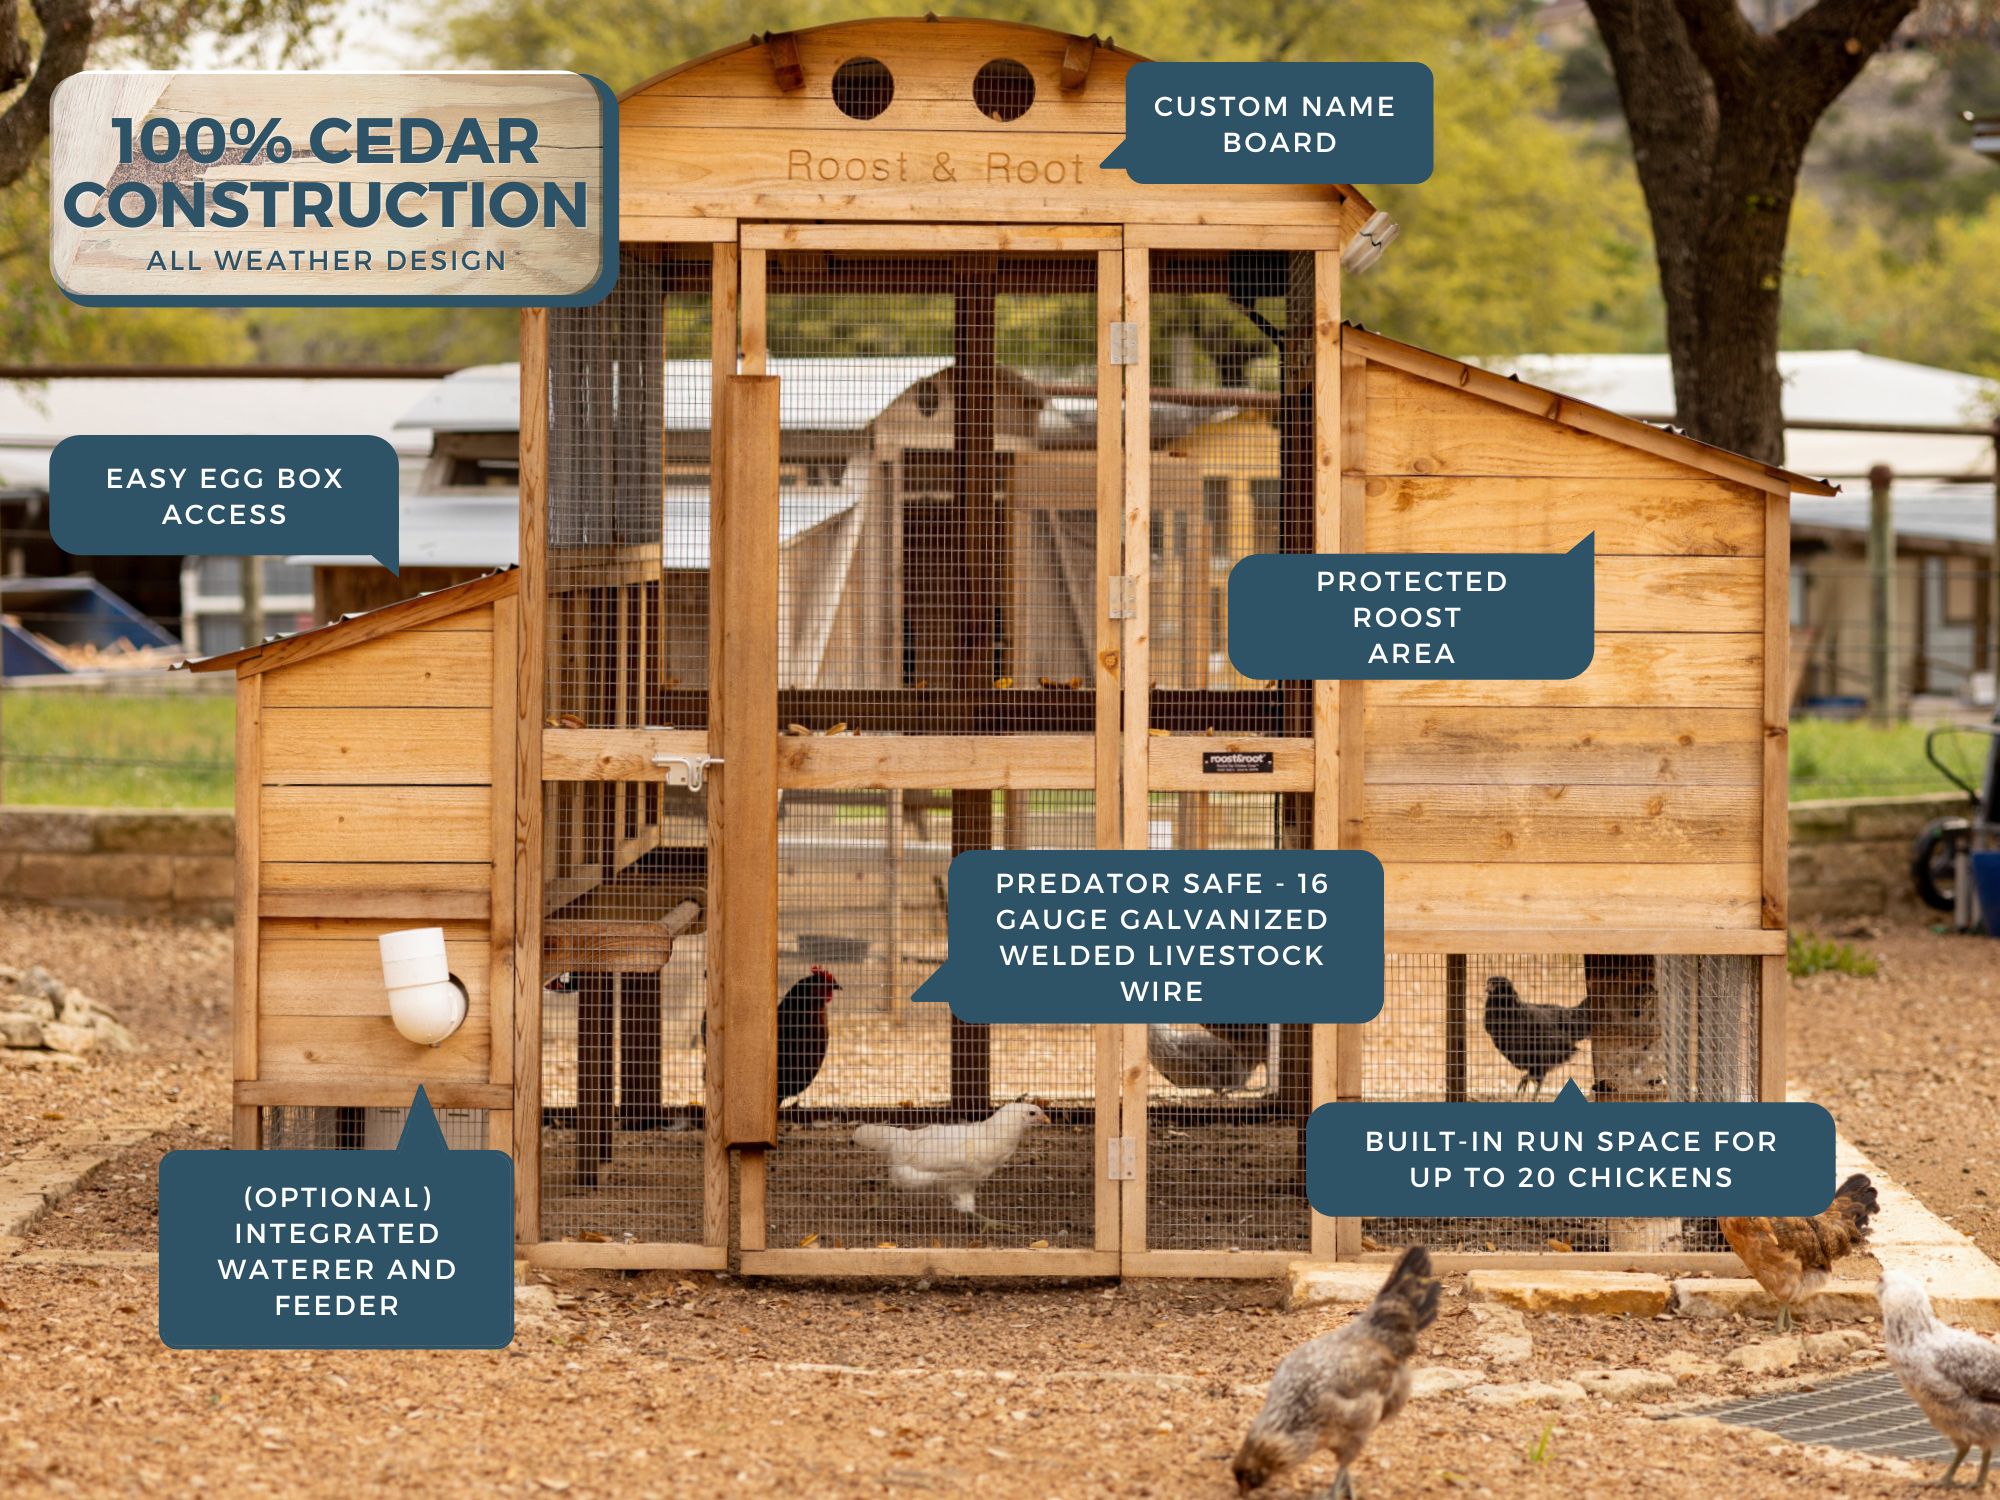 Walk-In Chicken Coop With Product Features Shown